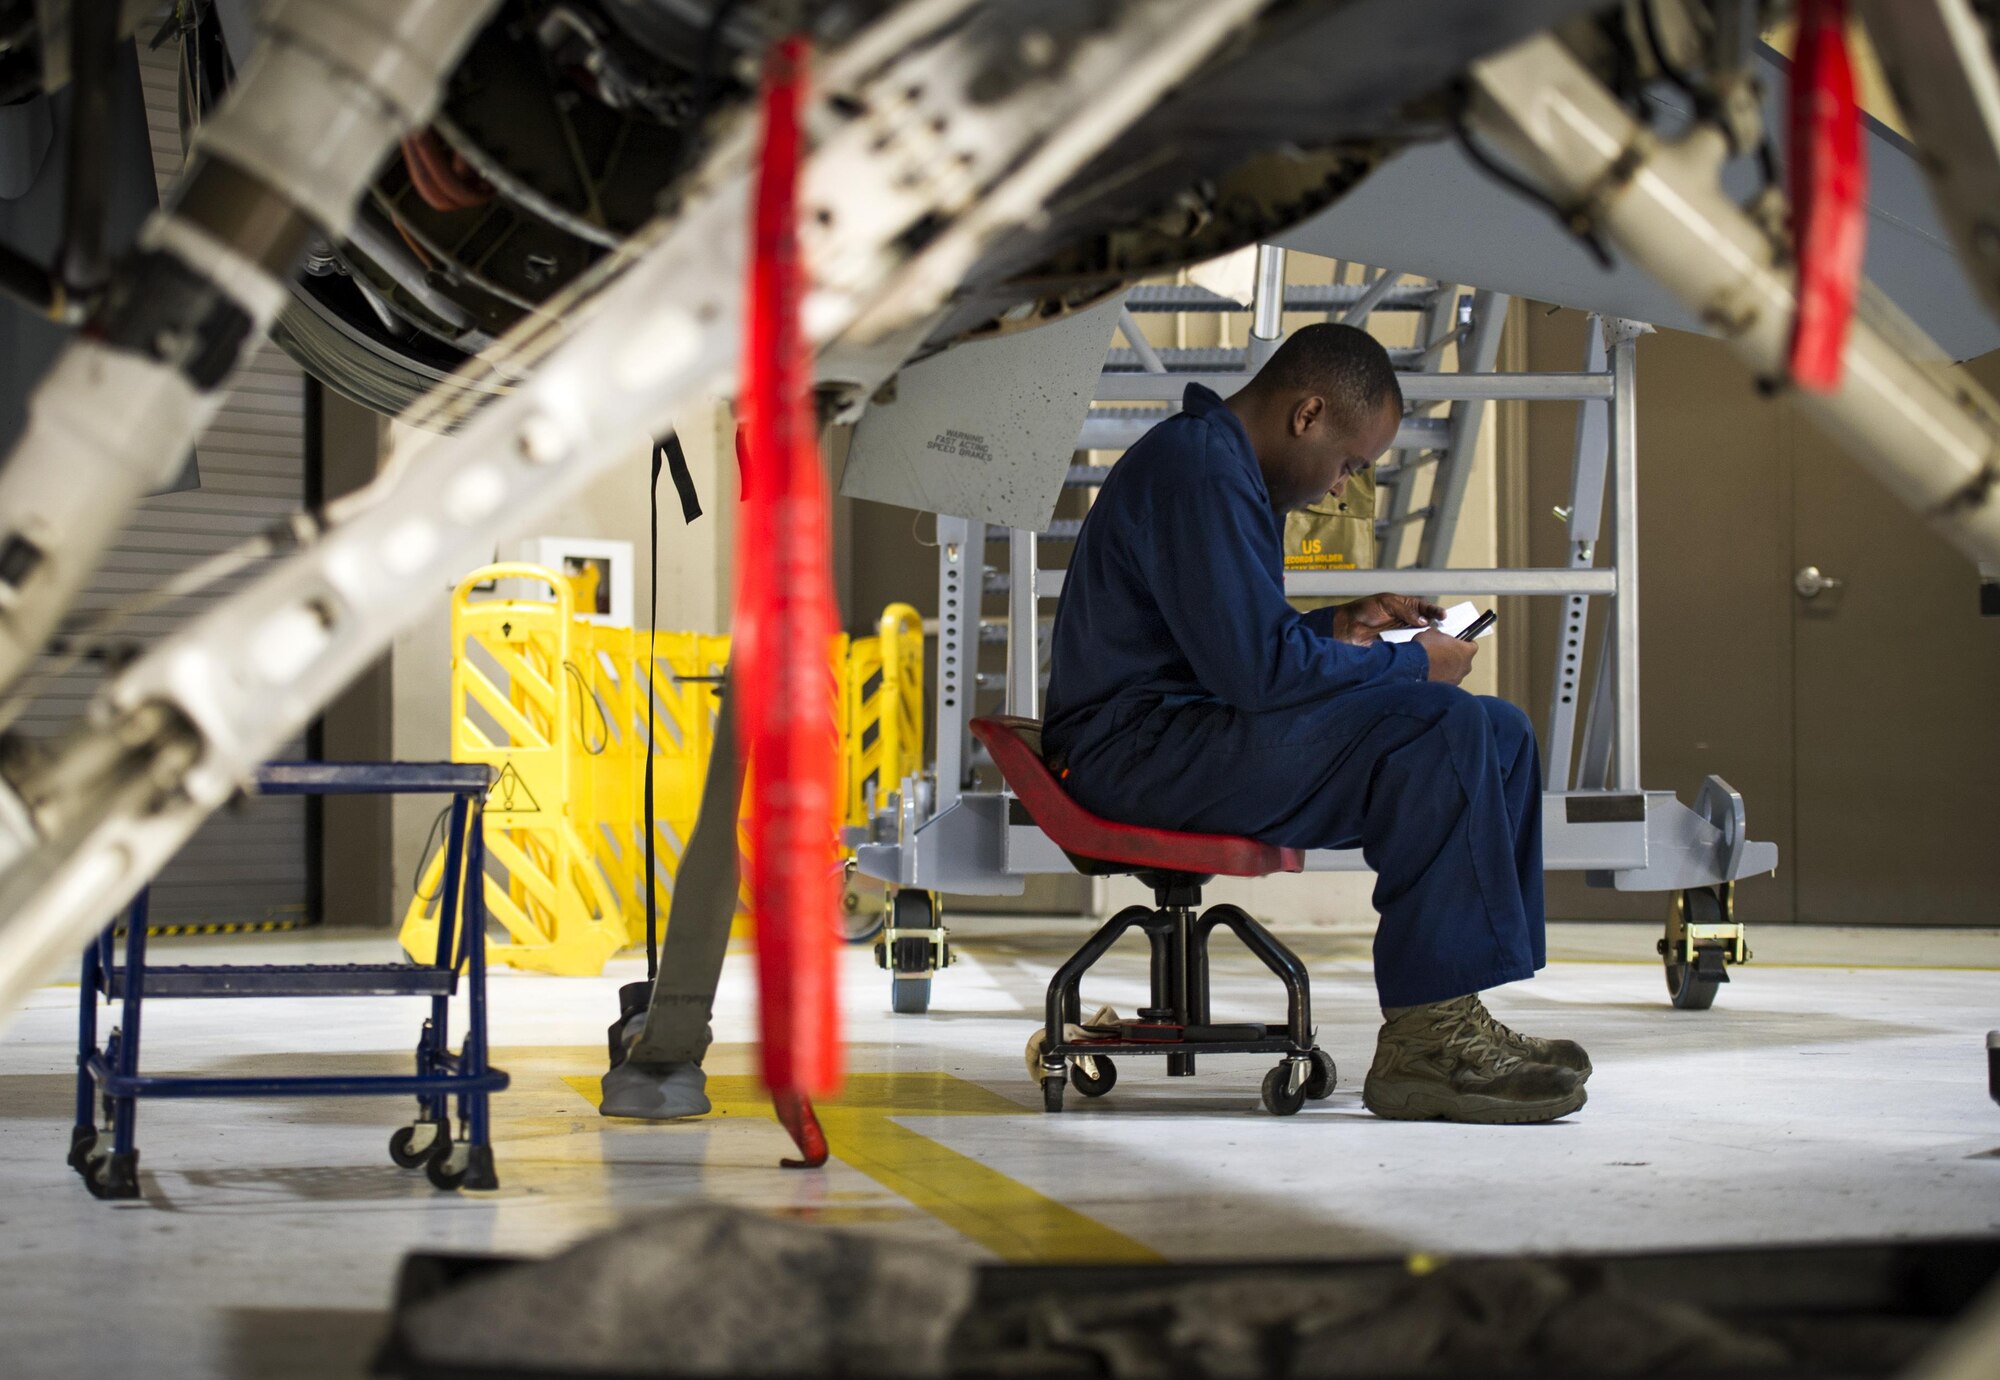 A 113th Wing maintenance technician logs information during an inspection of an F-16 Fighting Falcon at Joint Base Andrews, Md., March 27, 2017. Aircraft Inspections are conducted to ensure the F-16’s are prepared to support the 113th WG’s 24/7 alert fighter defense mission to the National Capital Region. (U.S. Air Force photo by Airman 1st Class Gabrielle Spalding)